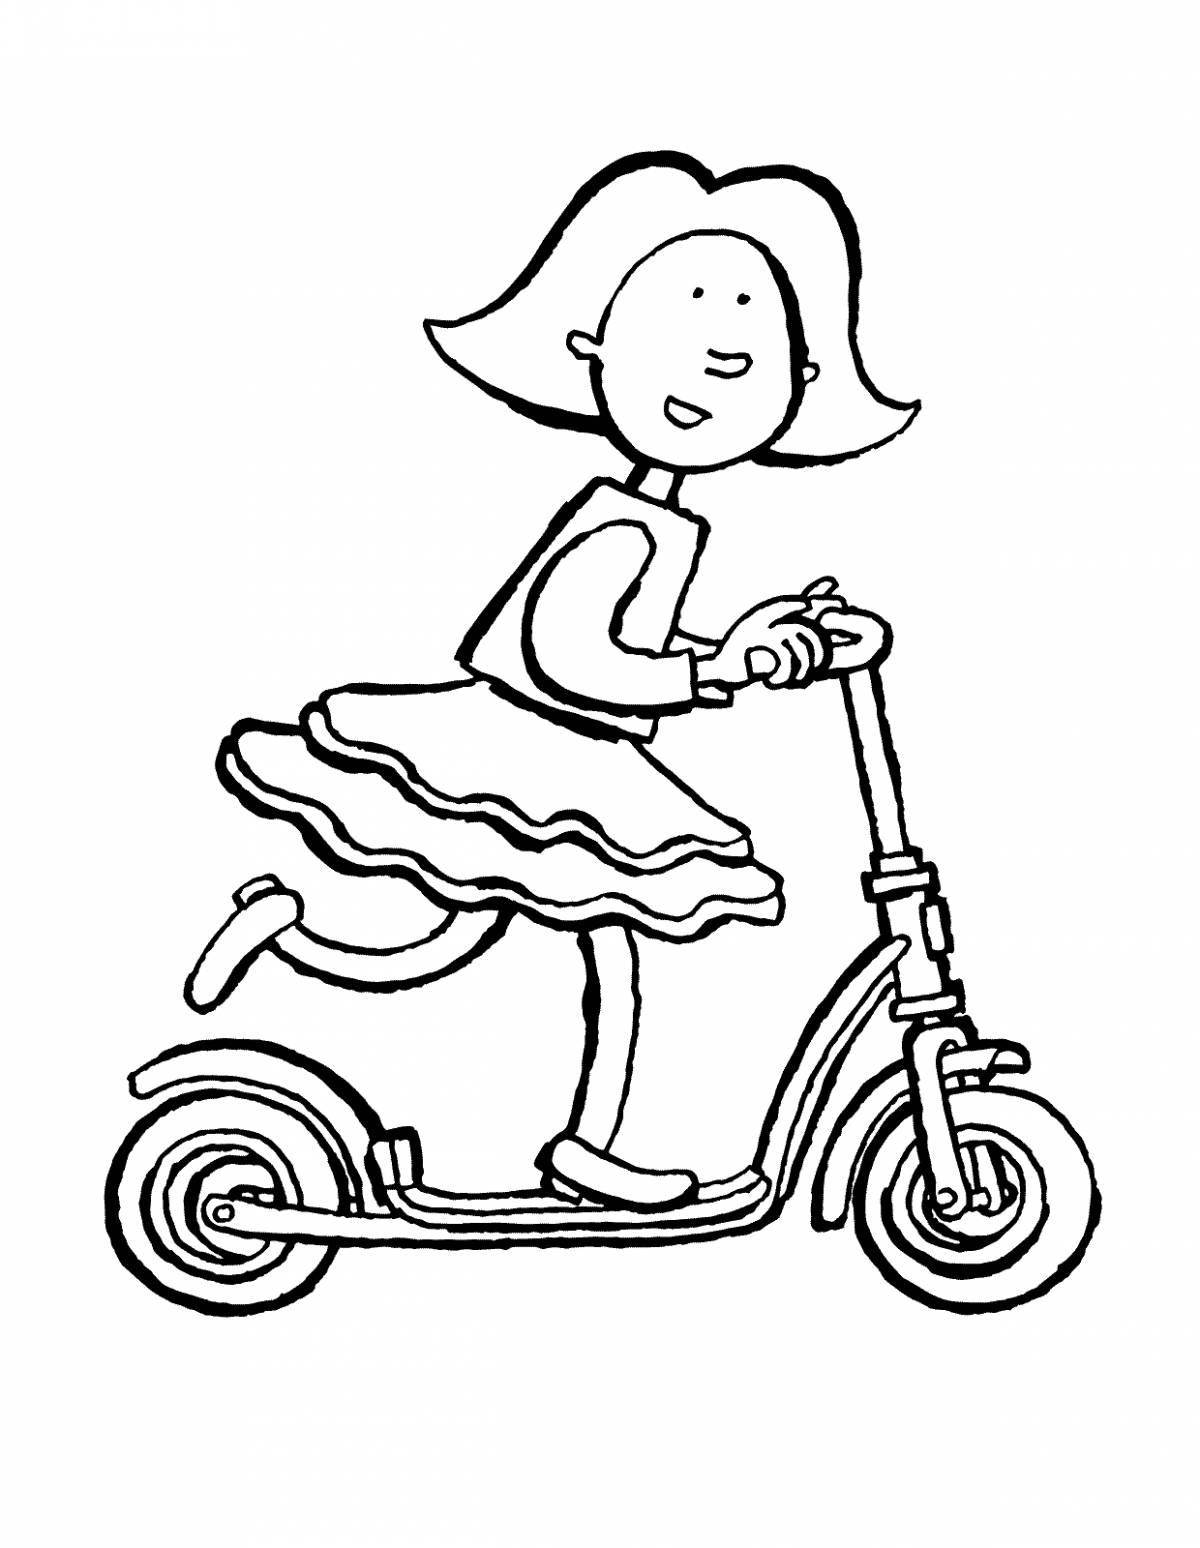 Fancy coloring scooter for kids